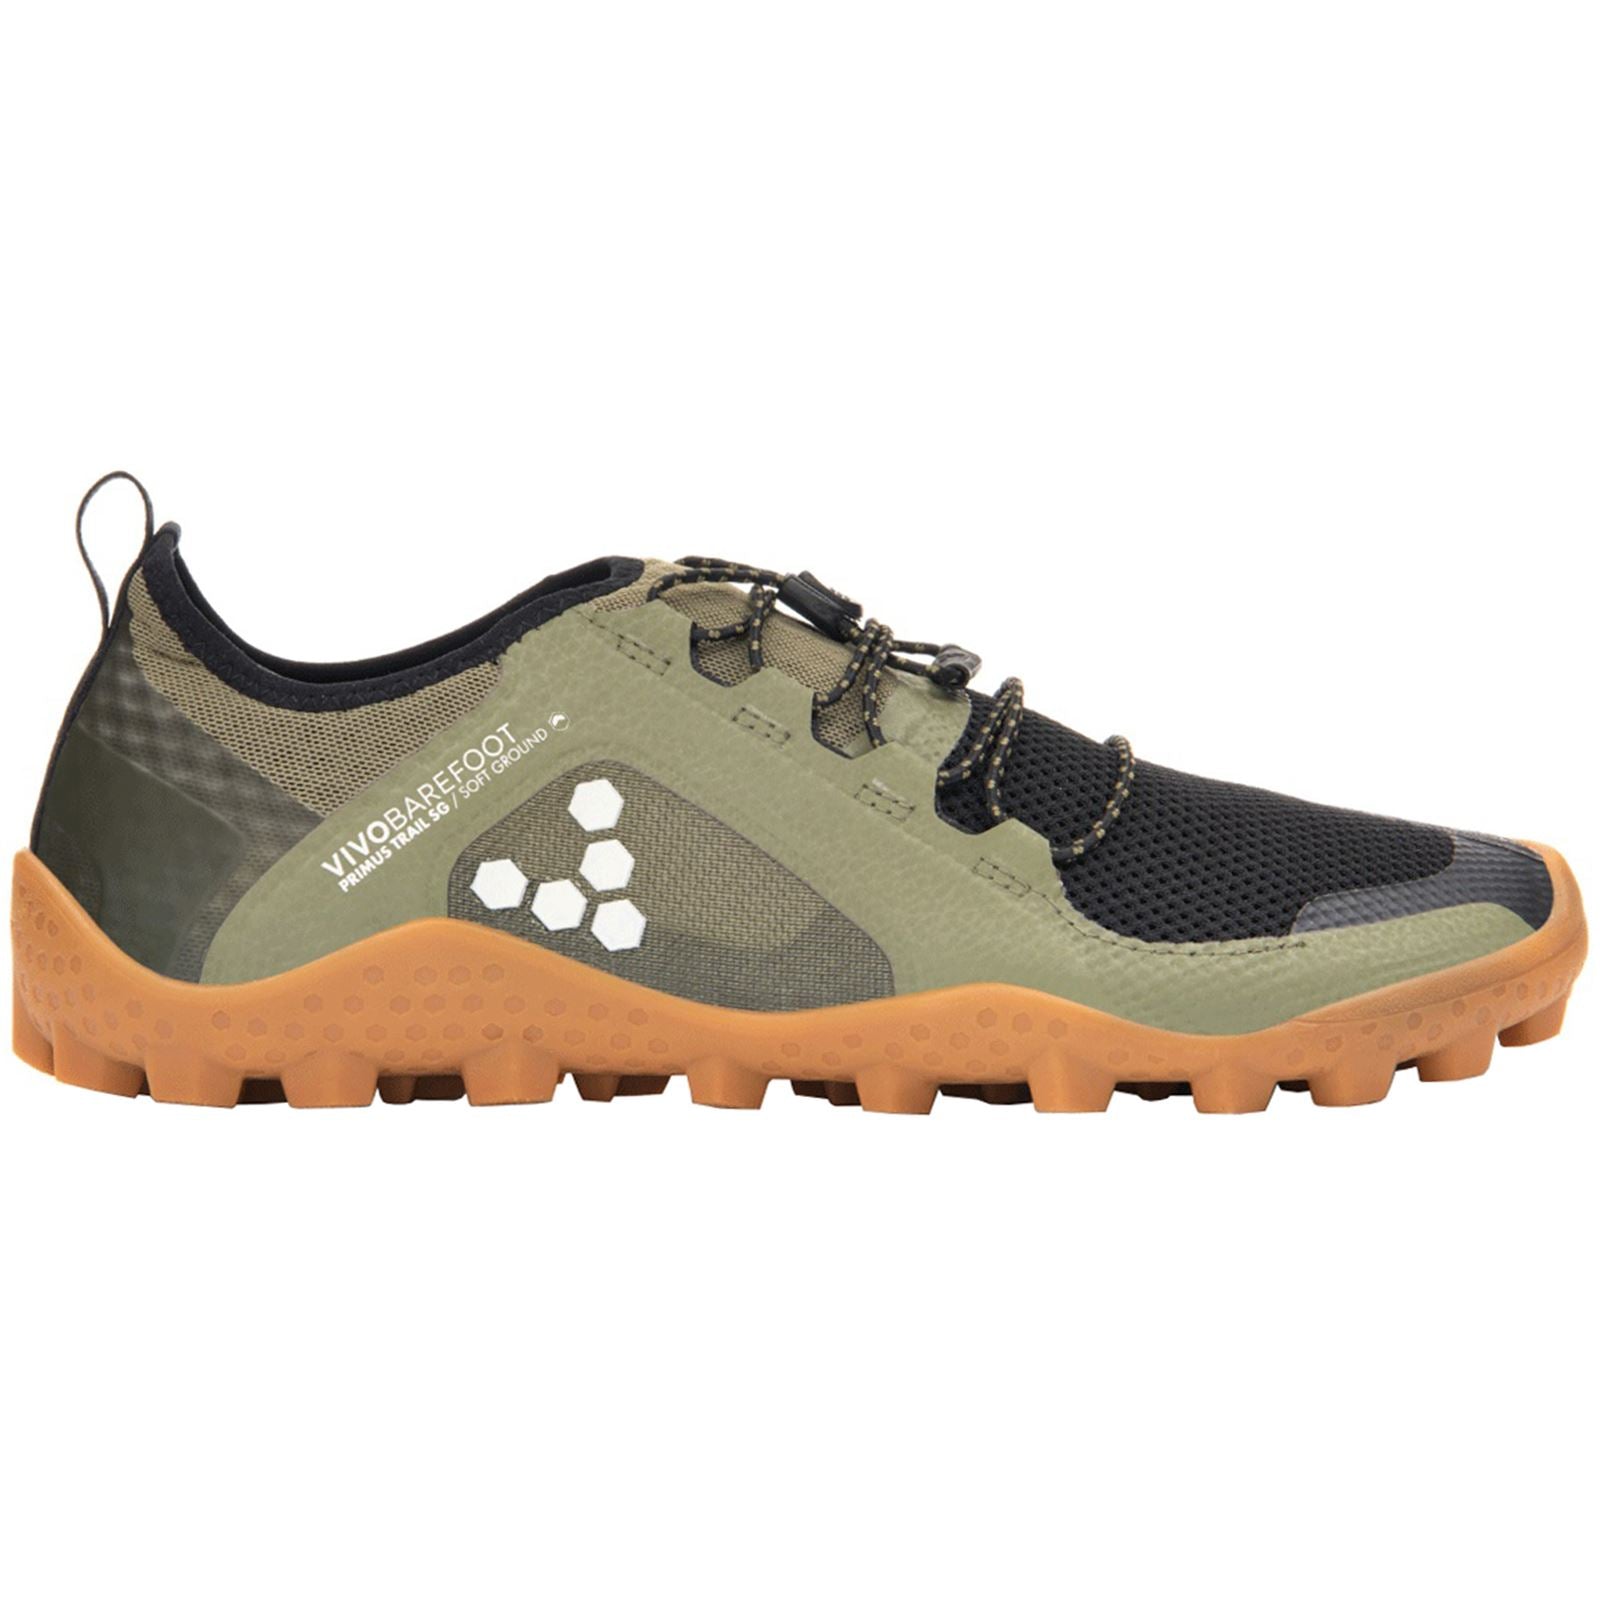 Vivobarefoot Primus Trail Soft Ground Mesh Men's Trainers#color_olive